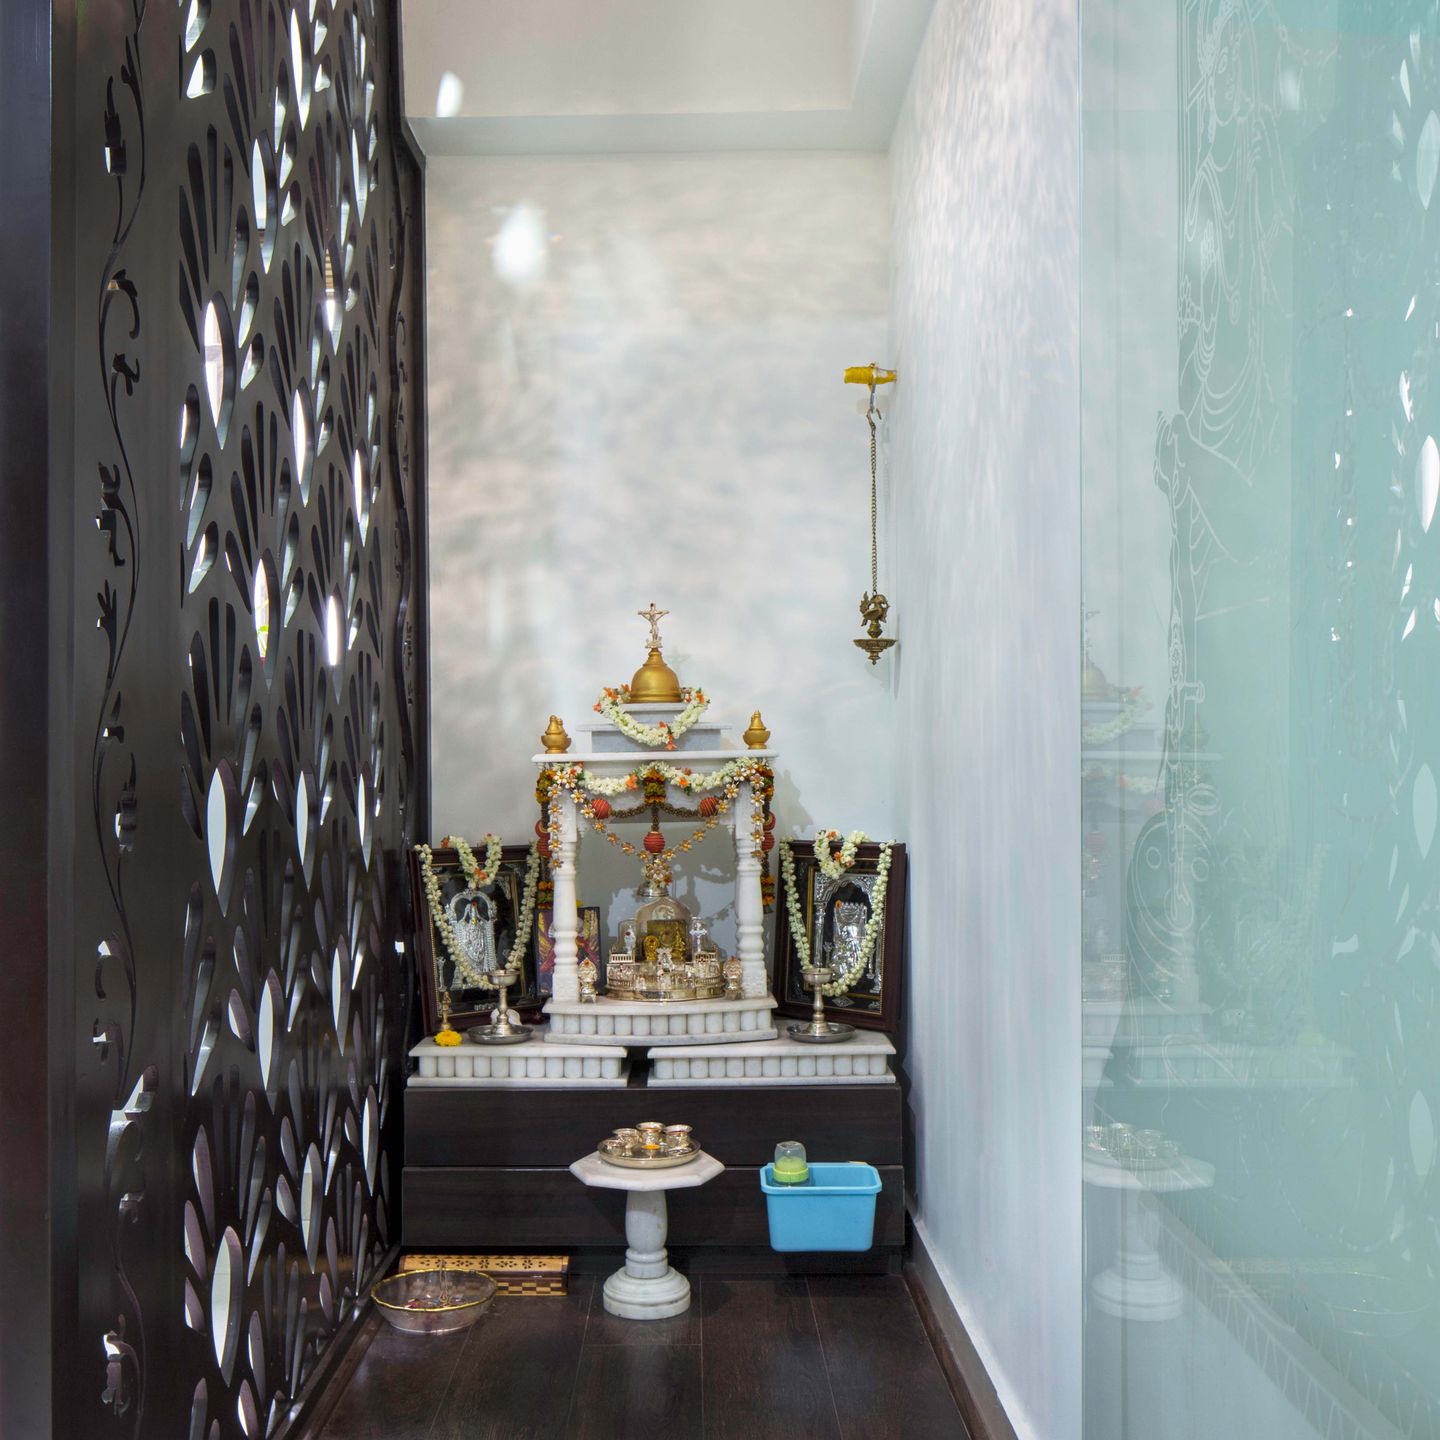 3x5 Ft Pooja Unit Design With Mystic Walnut Laminates And Ornate Partition Wall - Livspace